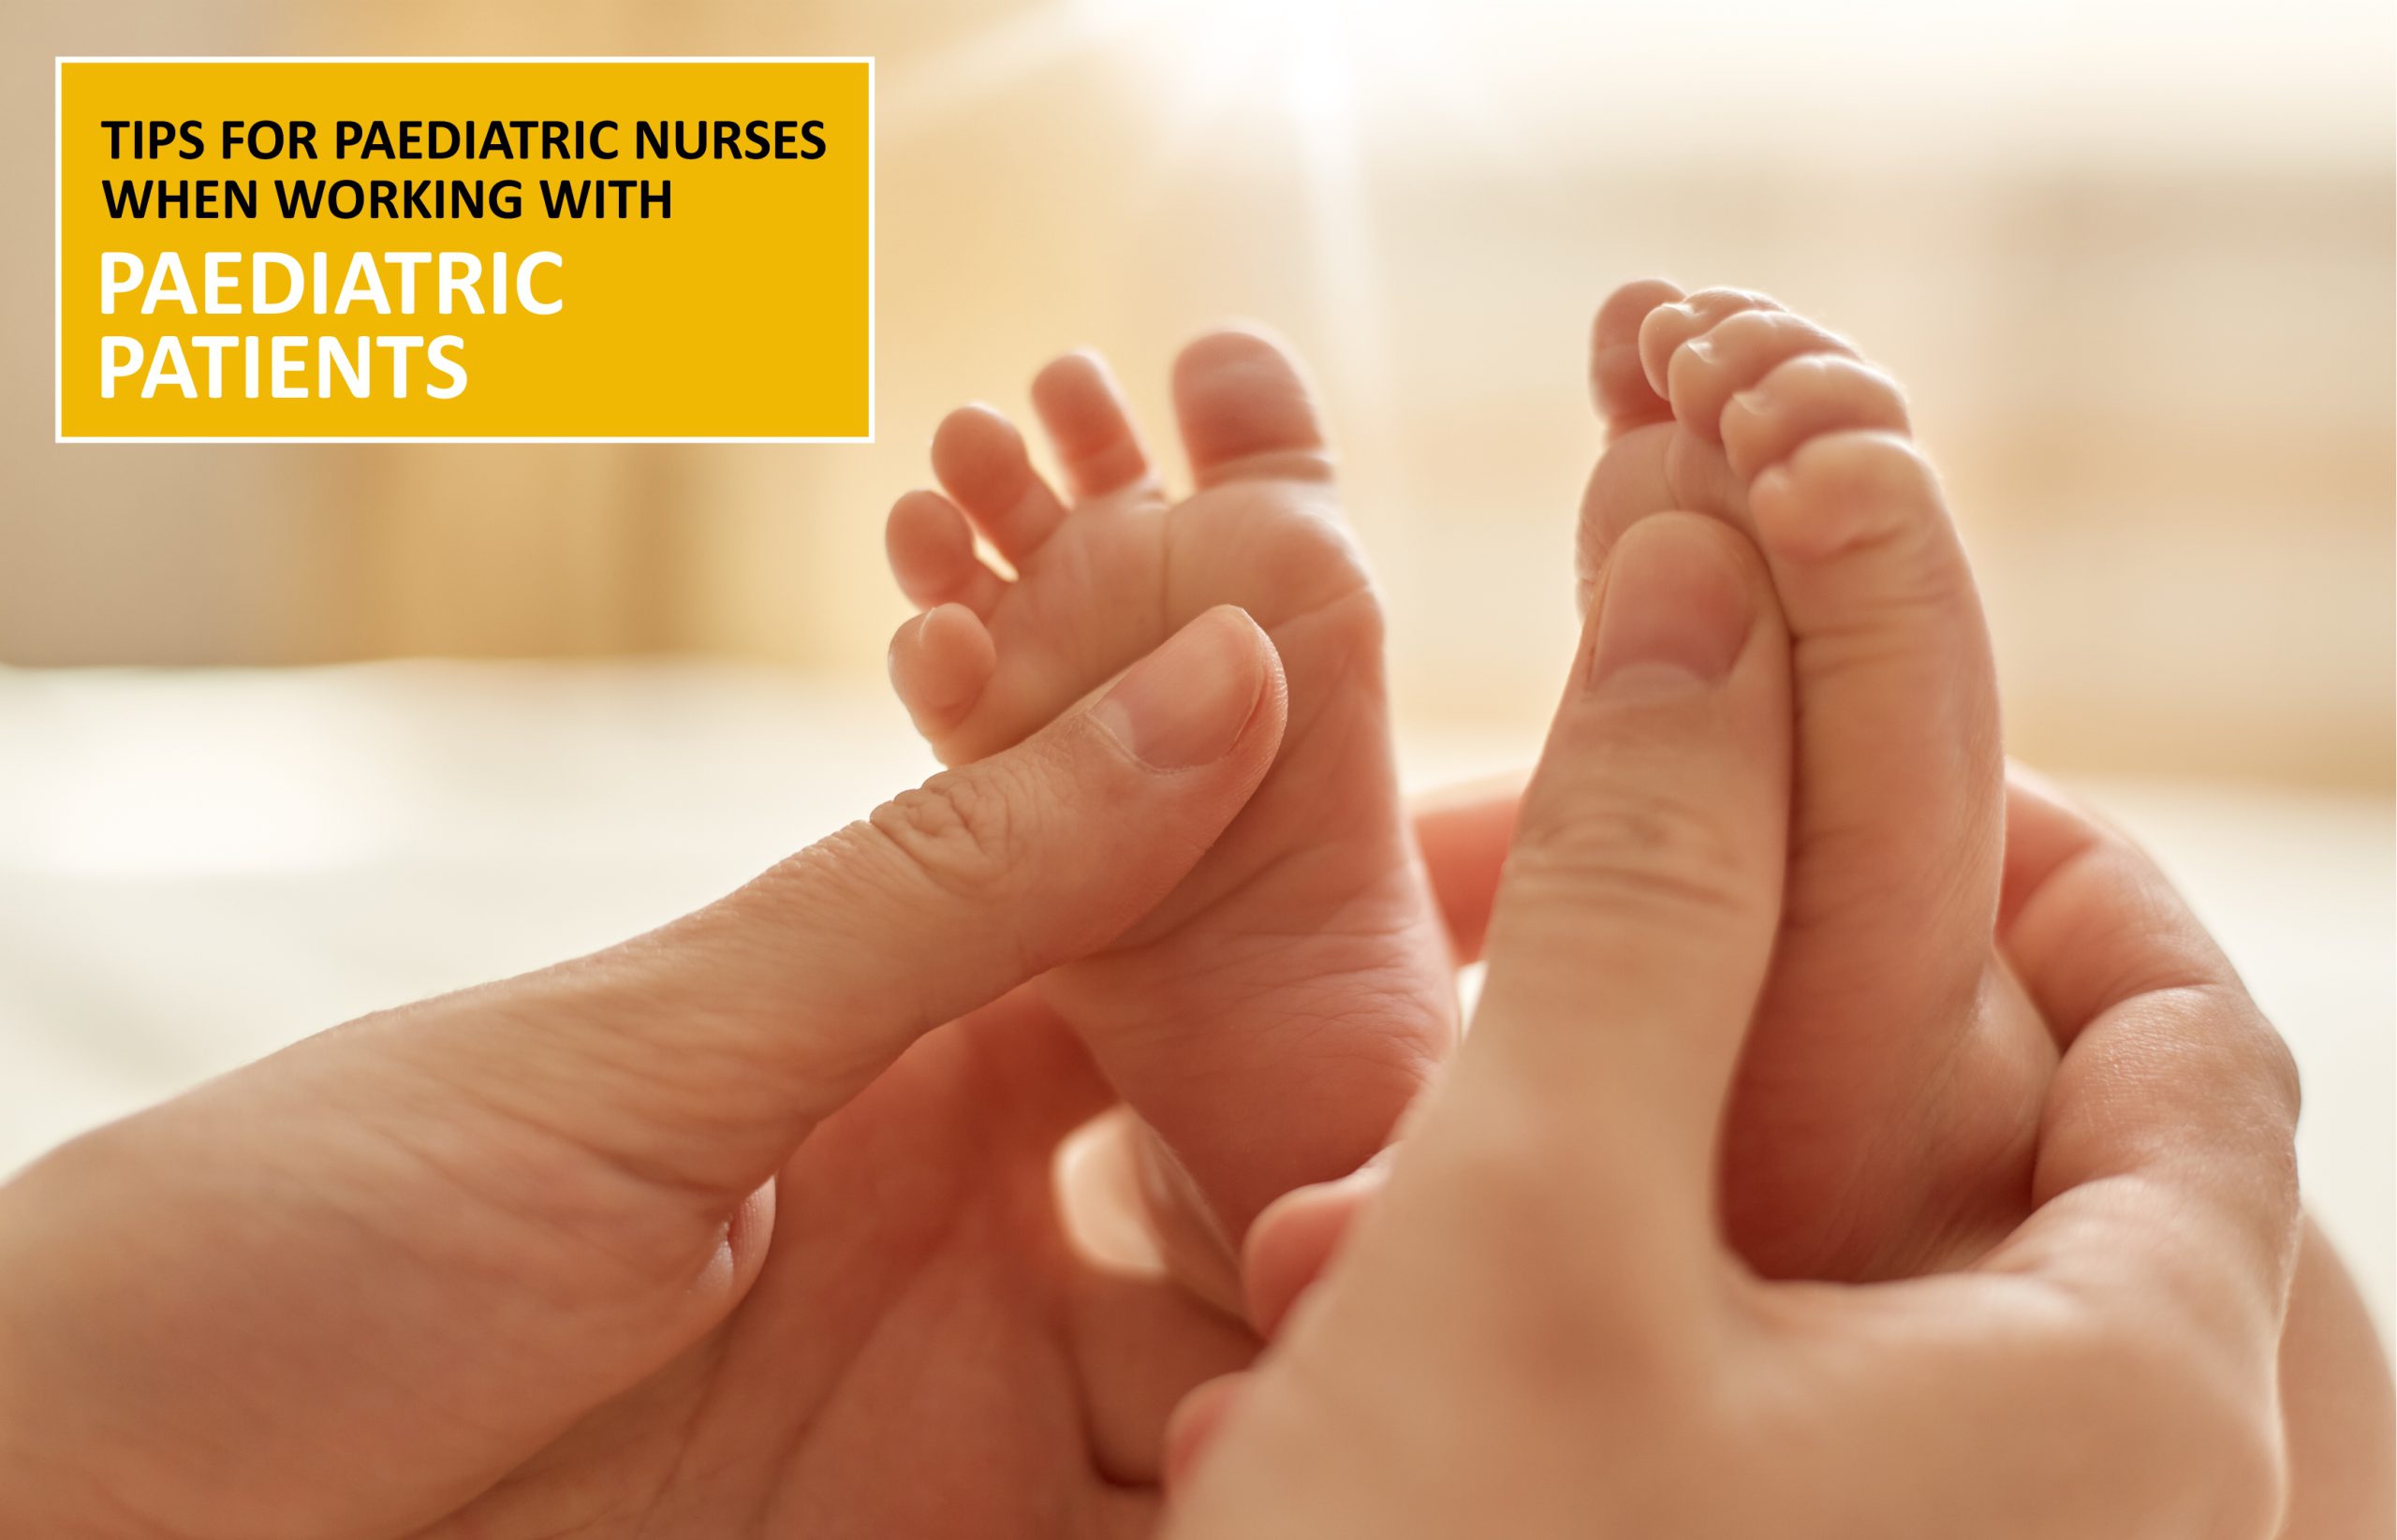 Tips for Paediatric Nurses when Working with Paediatric Patients